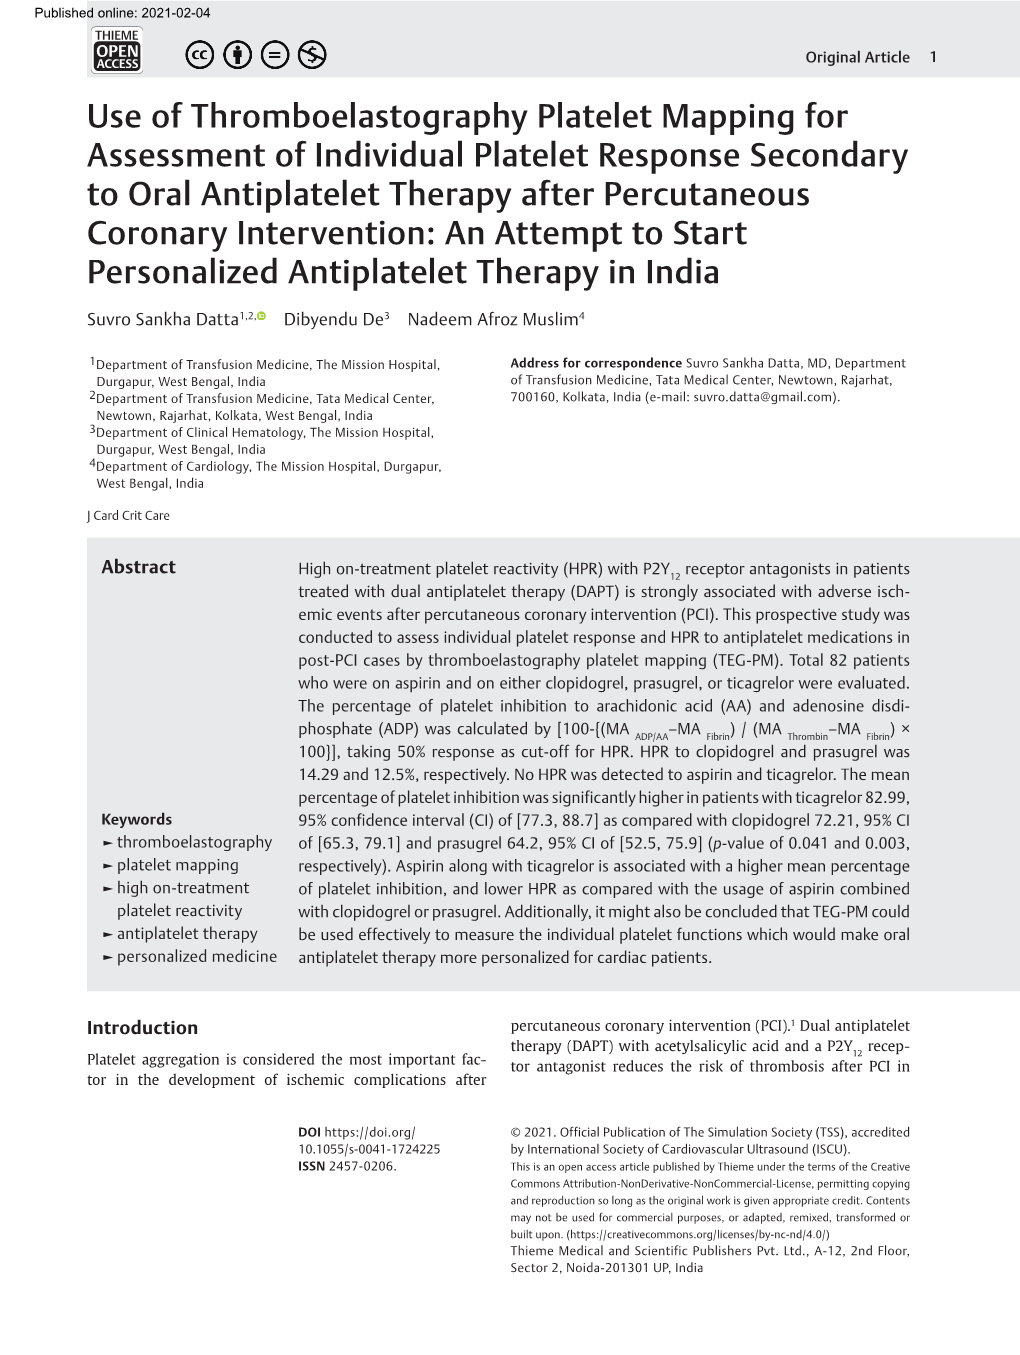 Use of Thromboelastography Platelet Mapping for Assessment of Individual Platelet Response Secondary to Oral Antiplatelet Therap